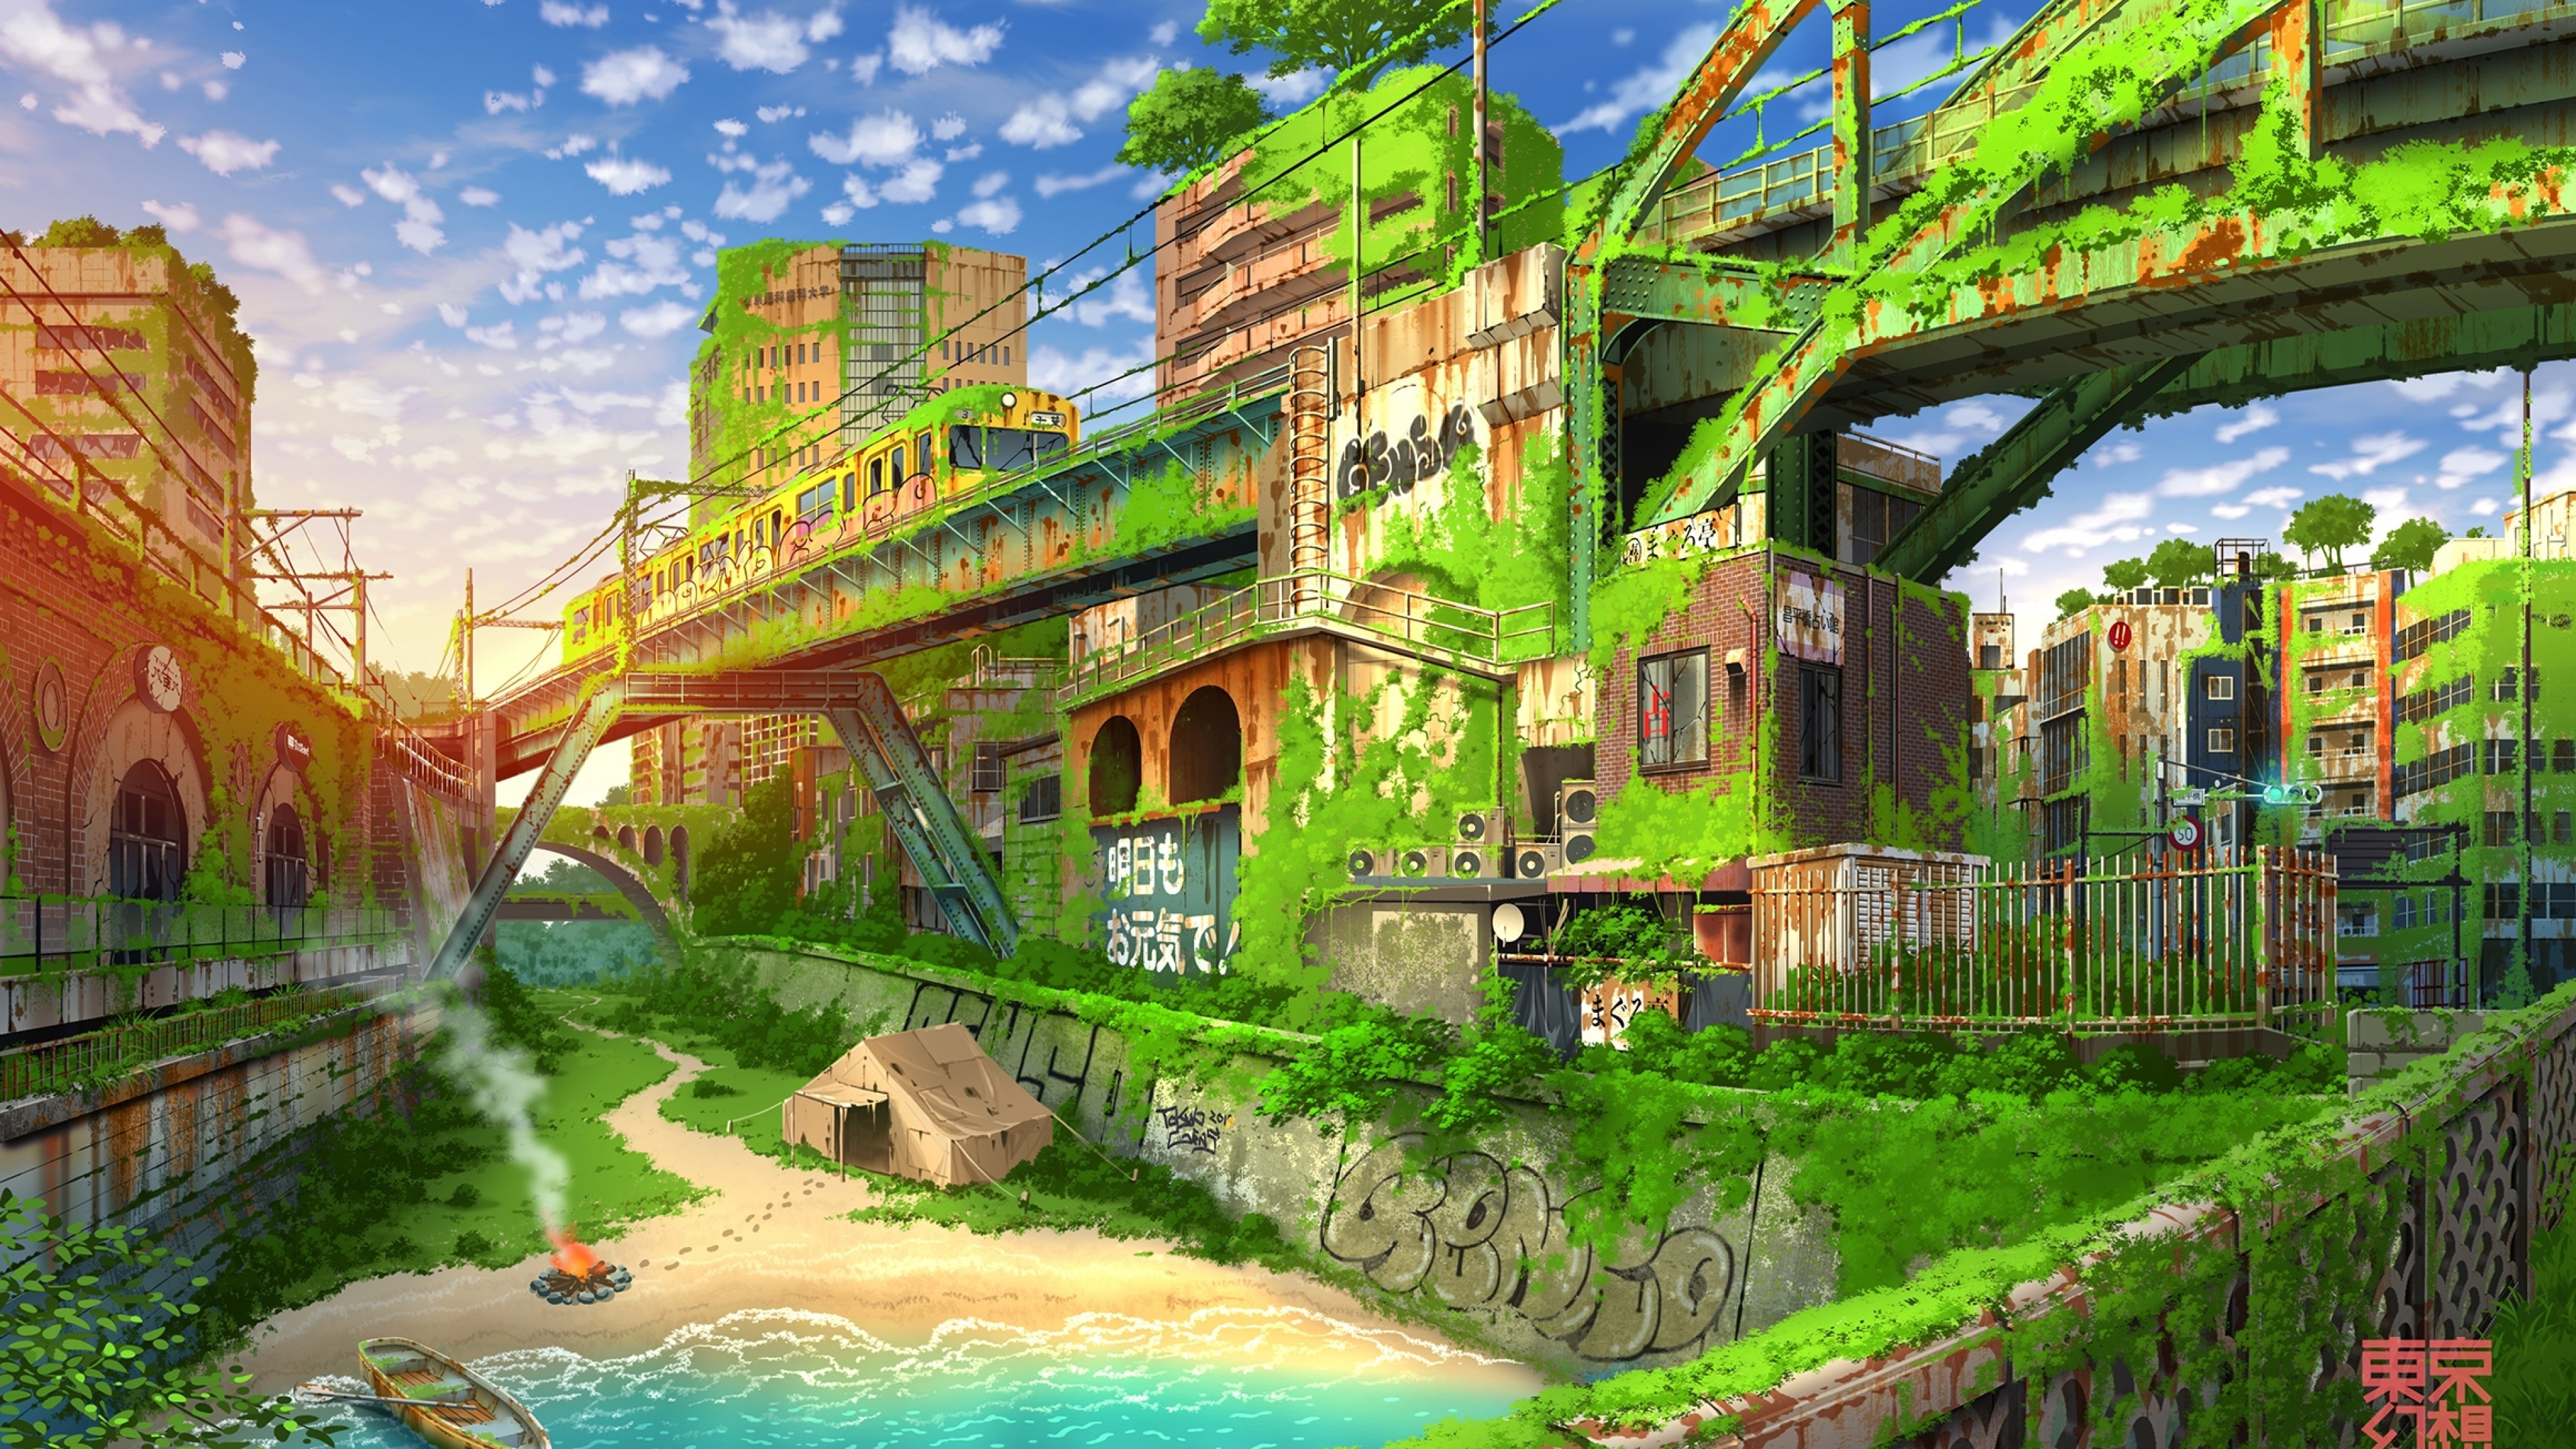 Anime Paisaje Soulworker Anime City Water Fire Boat Sunset Glow 3840x2160